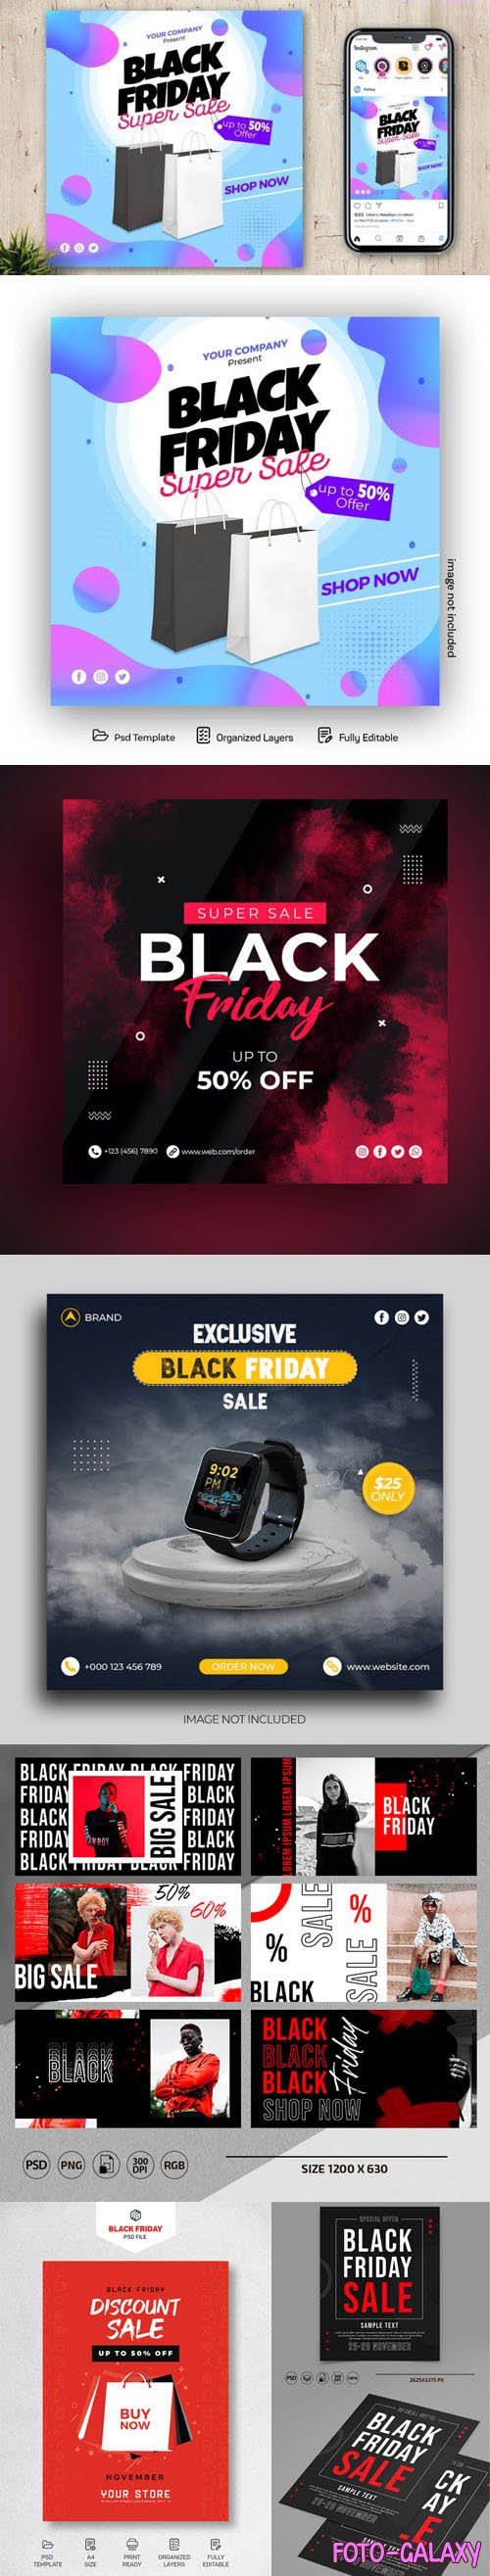 10+ Modern Black Friday Templates Collection